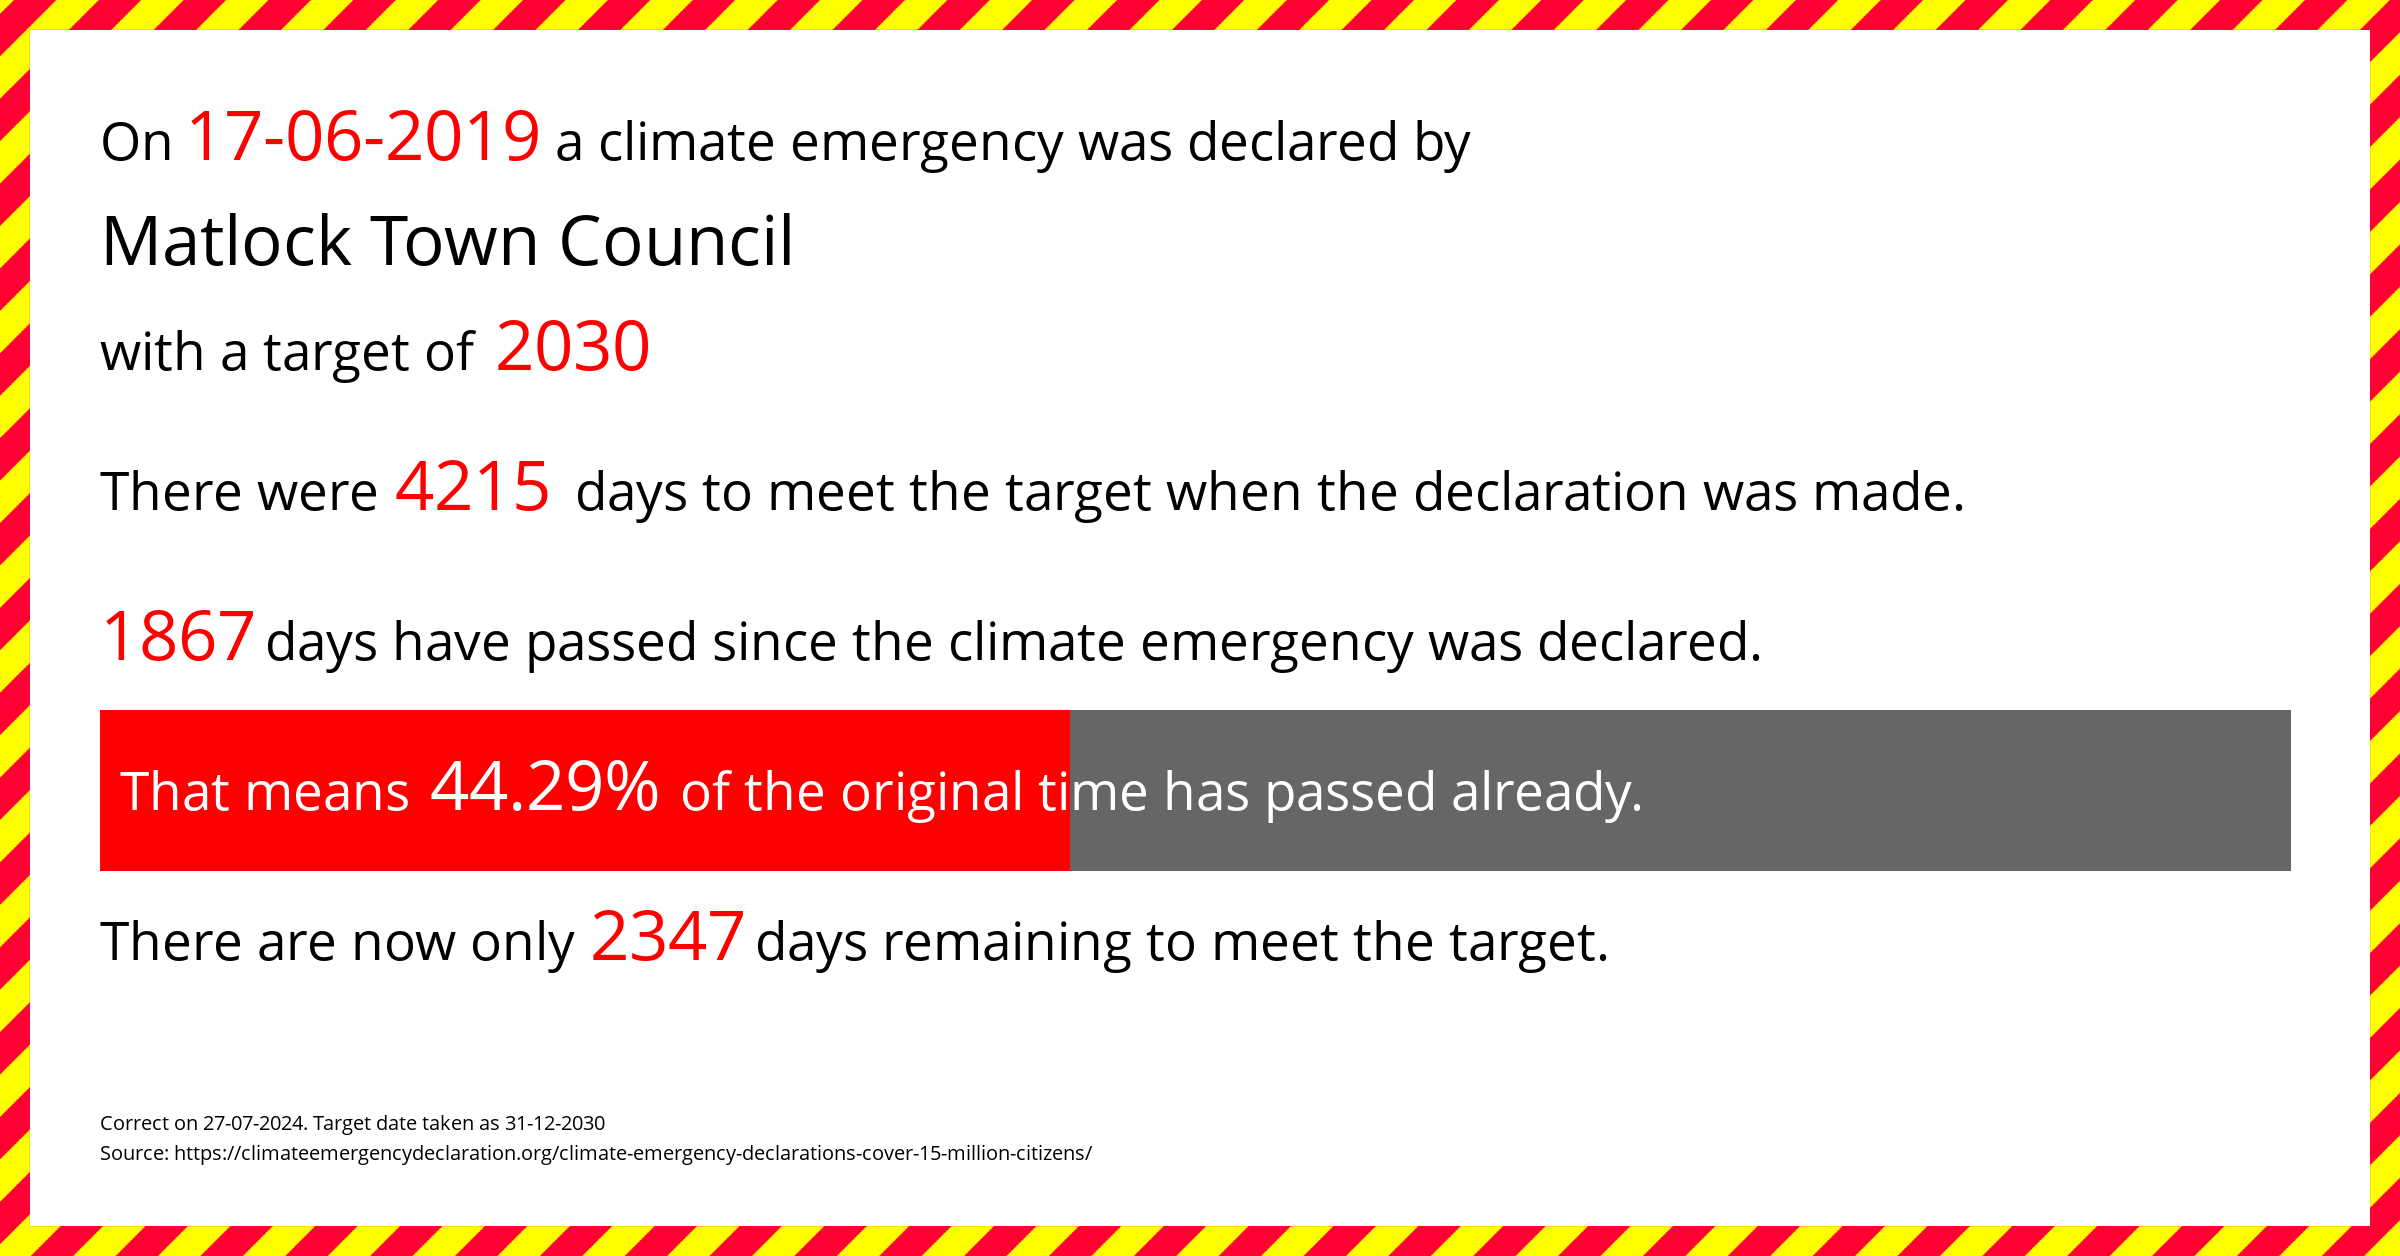 Matlock Town Council declared a Climate emergency on Monday 17th June 2019, with a target of 2030.